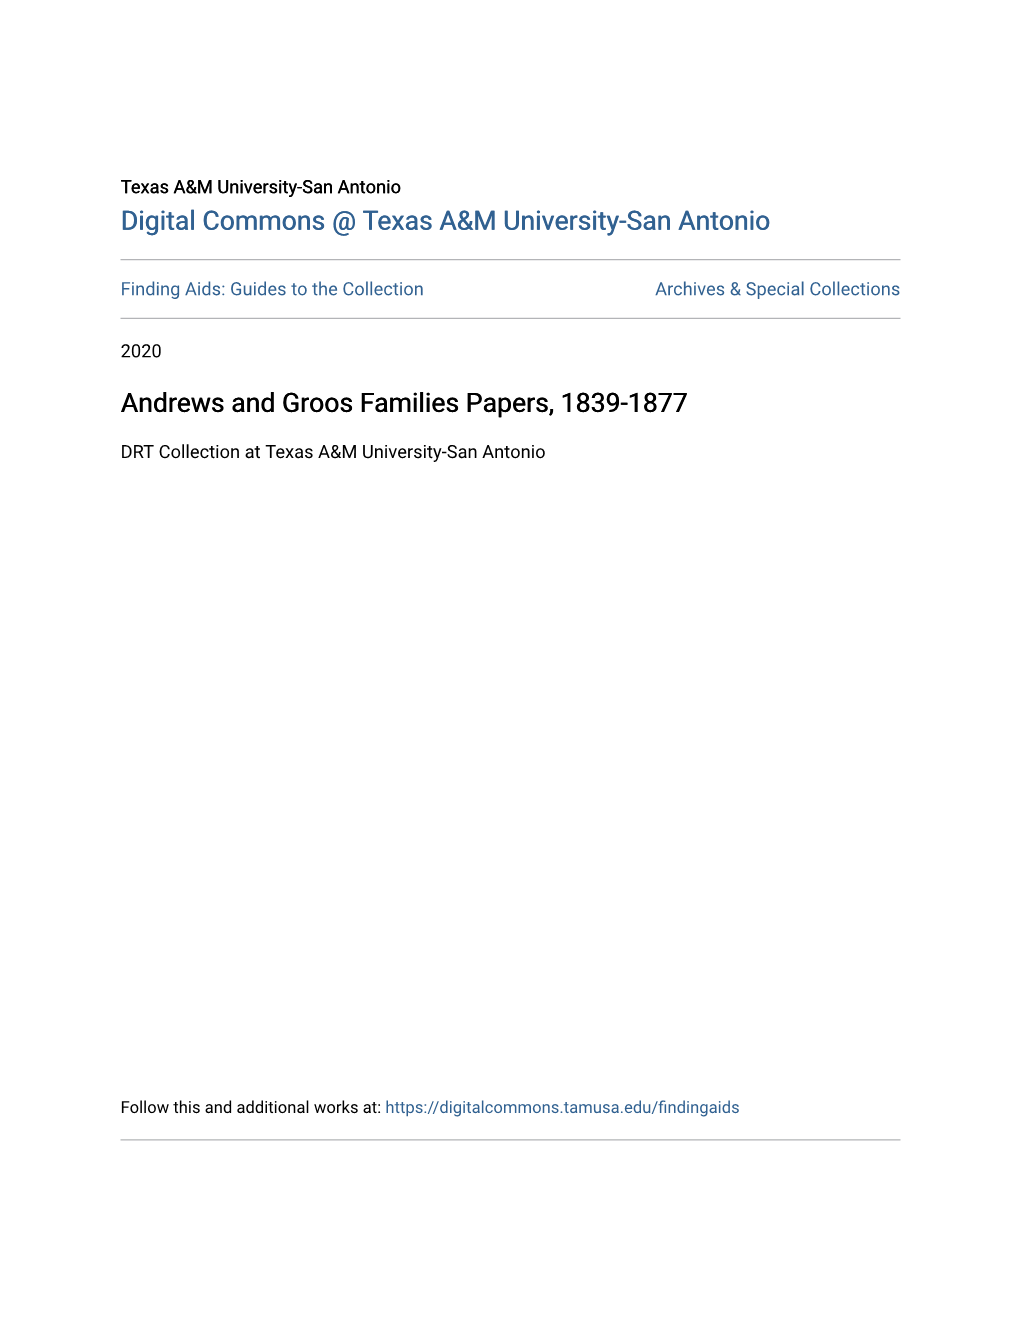 Andrews and Groos Families Papers, 1839-1877